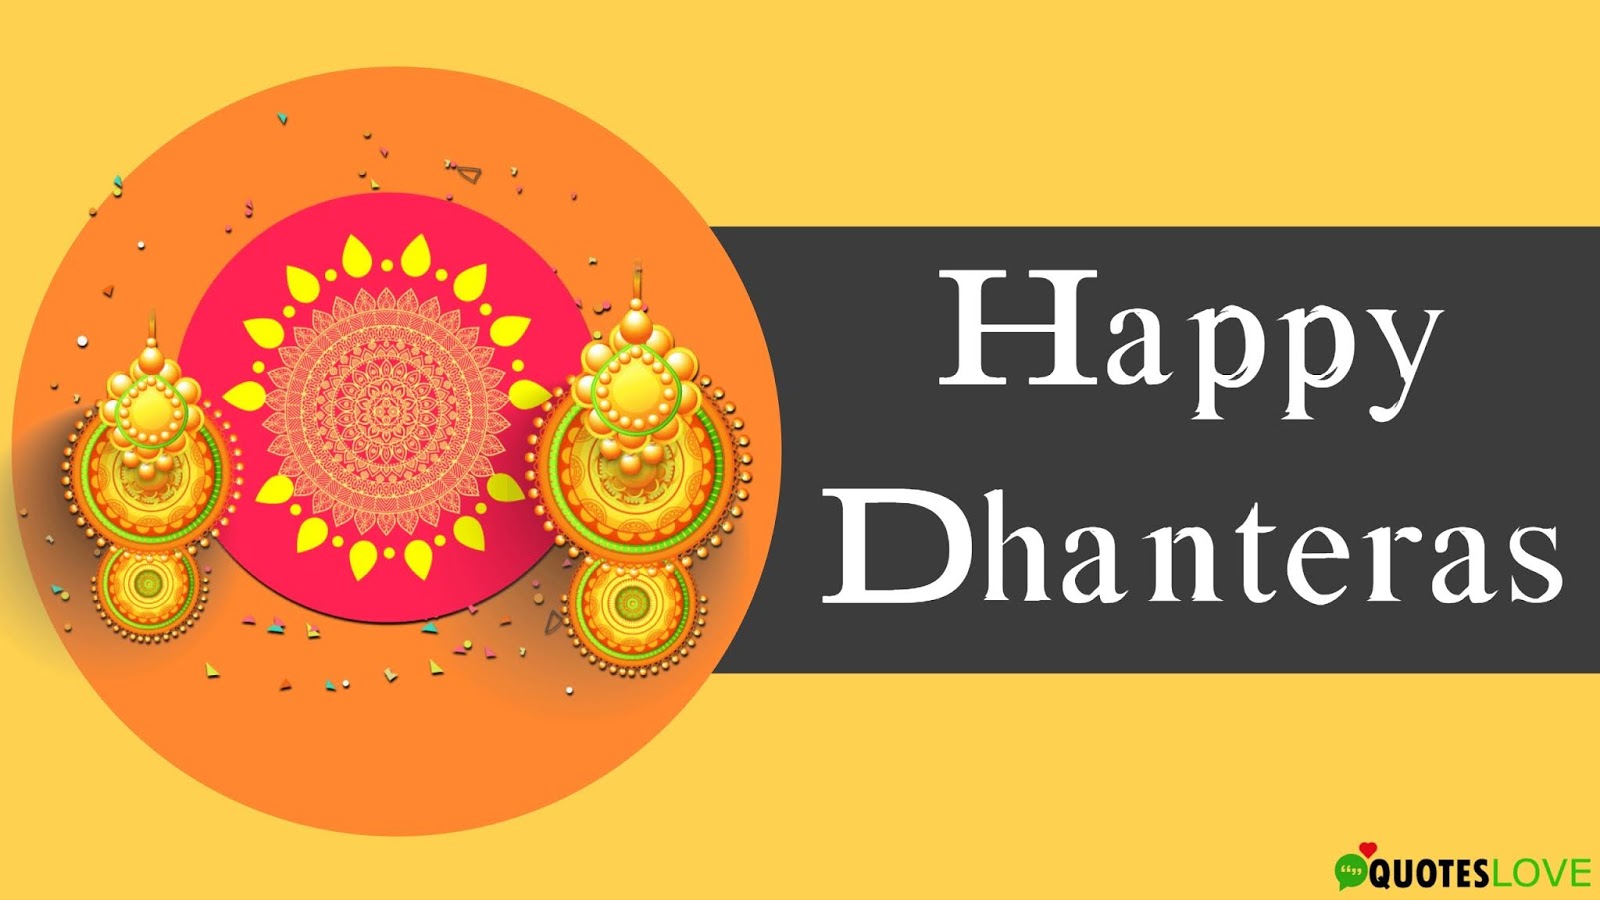 Happy Dhanteras Wishes Images - Happy Dhanteras Images 2019 - HD Wallpaper 